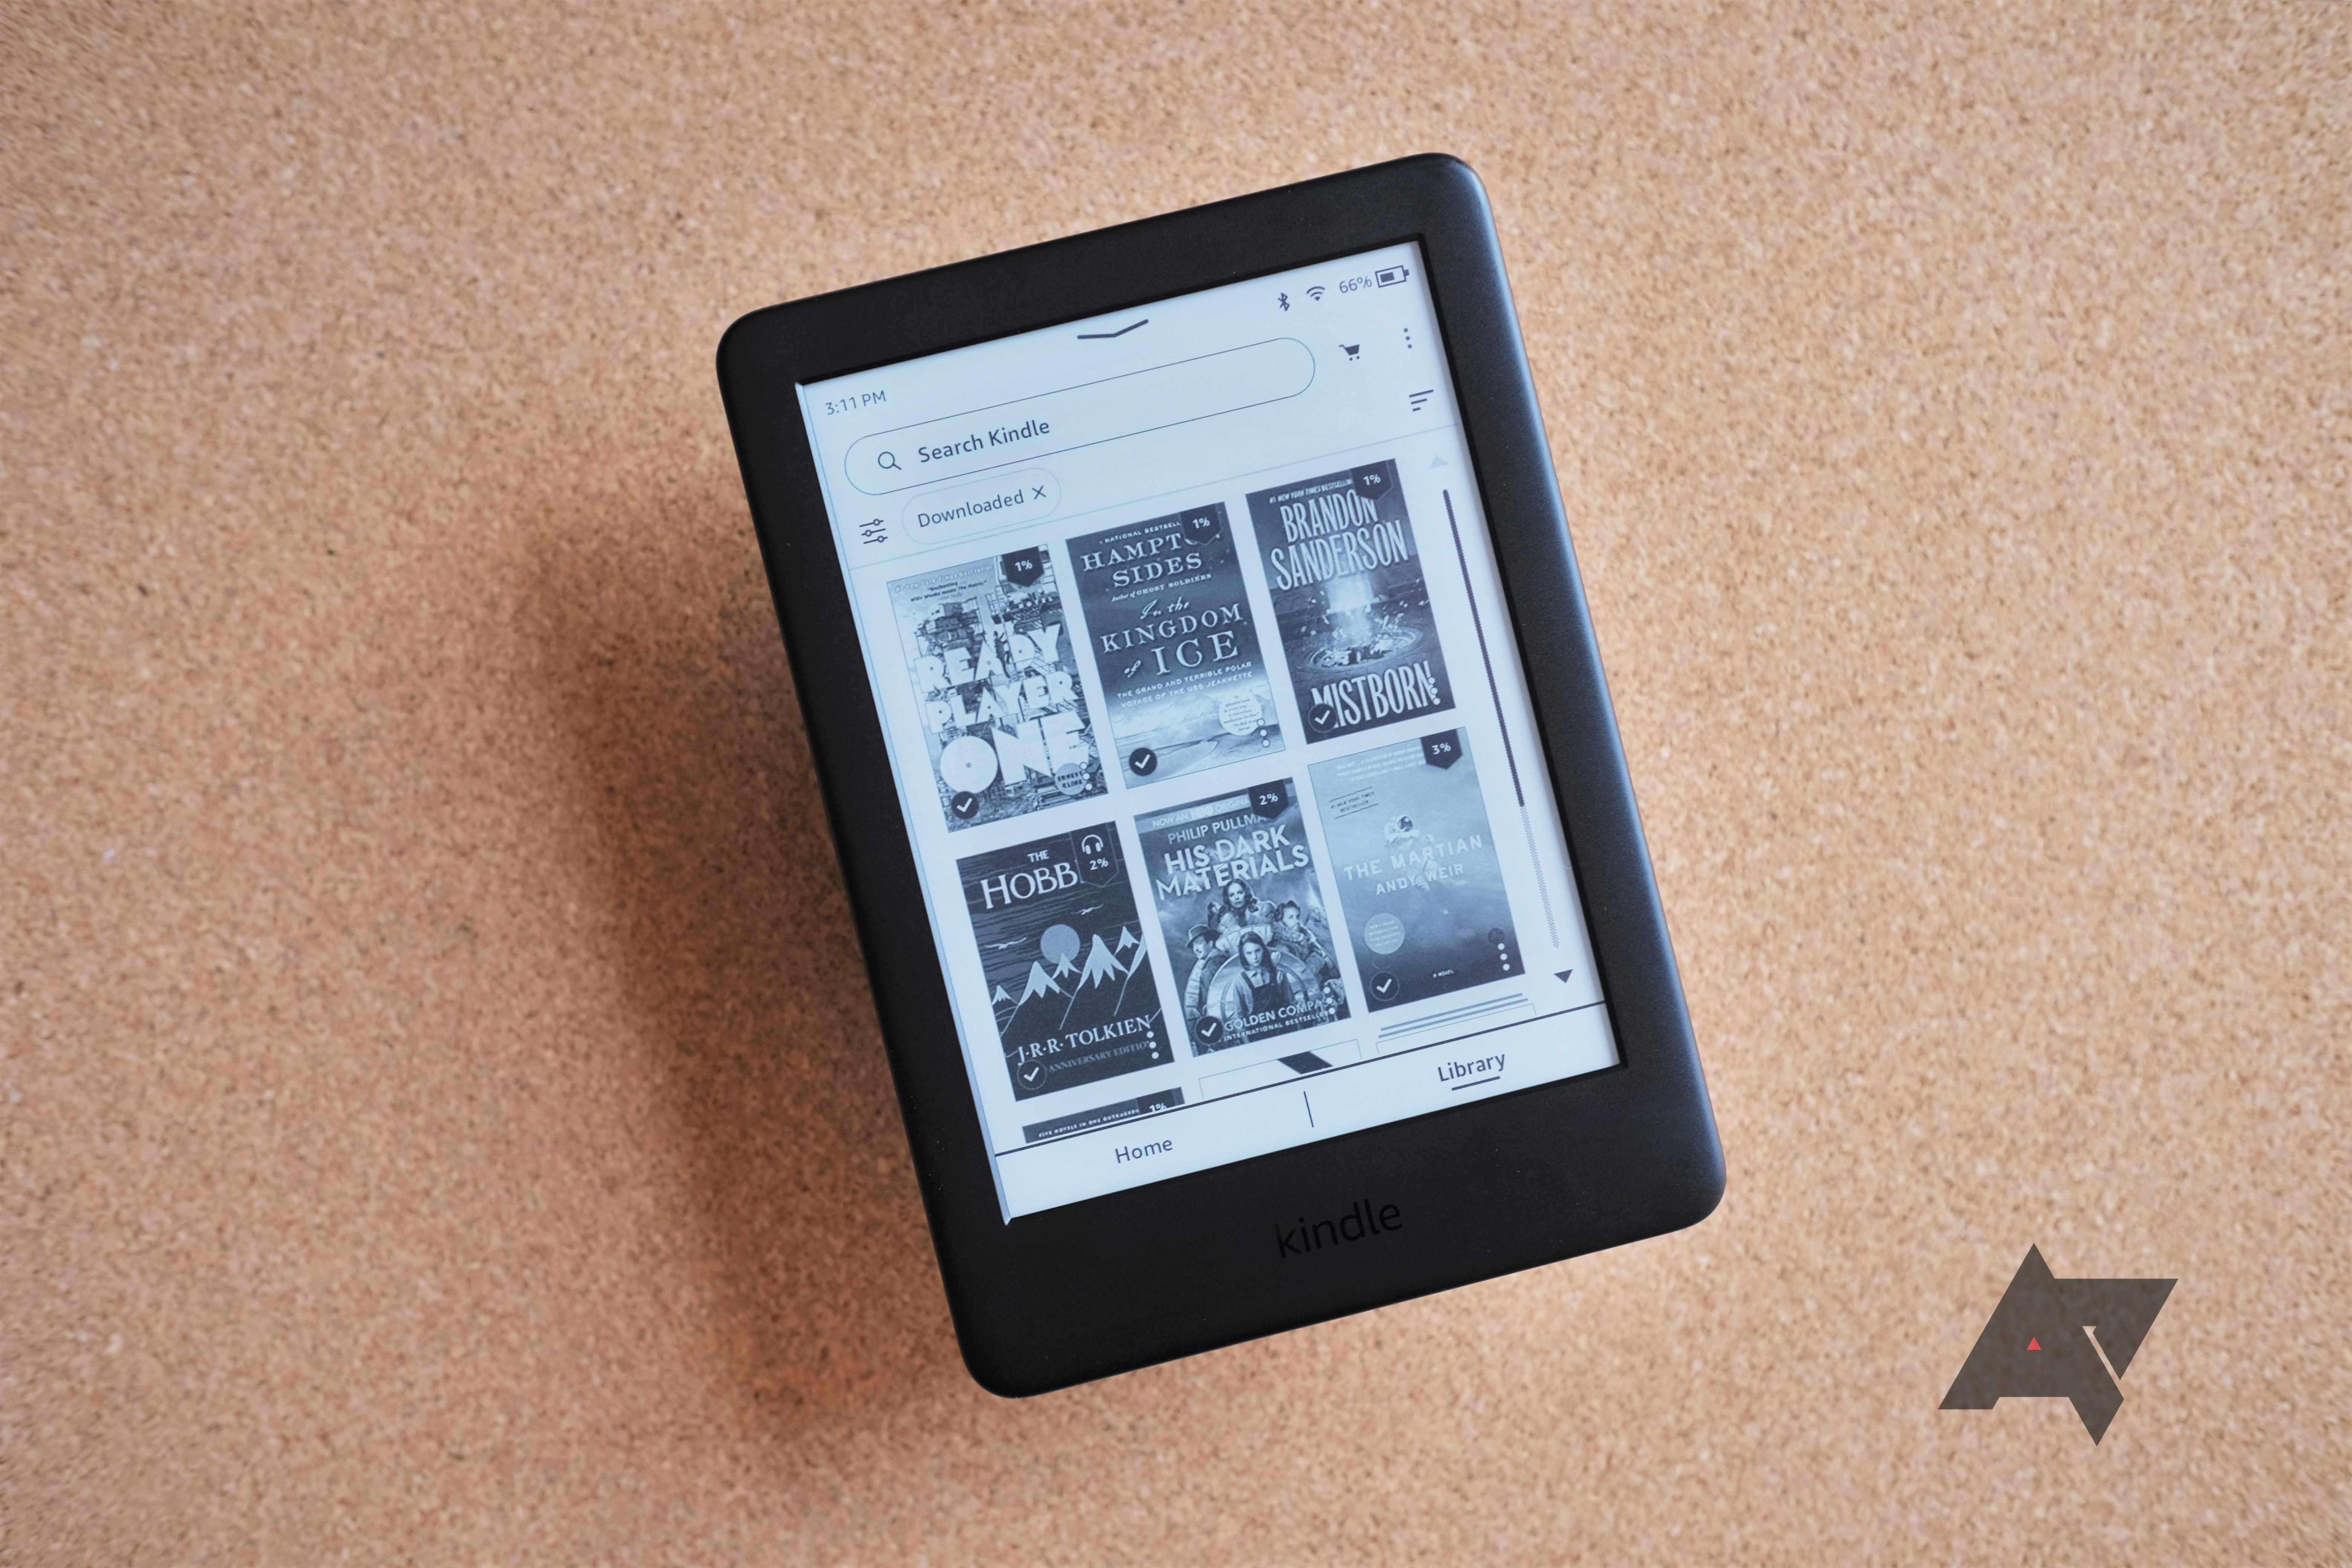 Head back to school with a new Amazon Kindle for up to $50 off